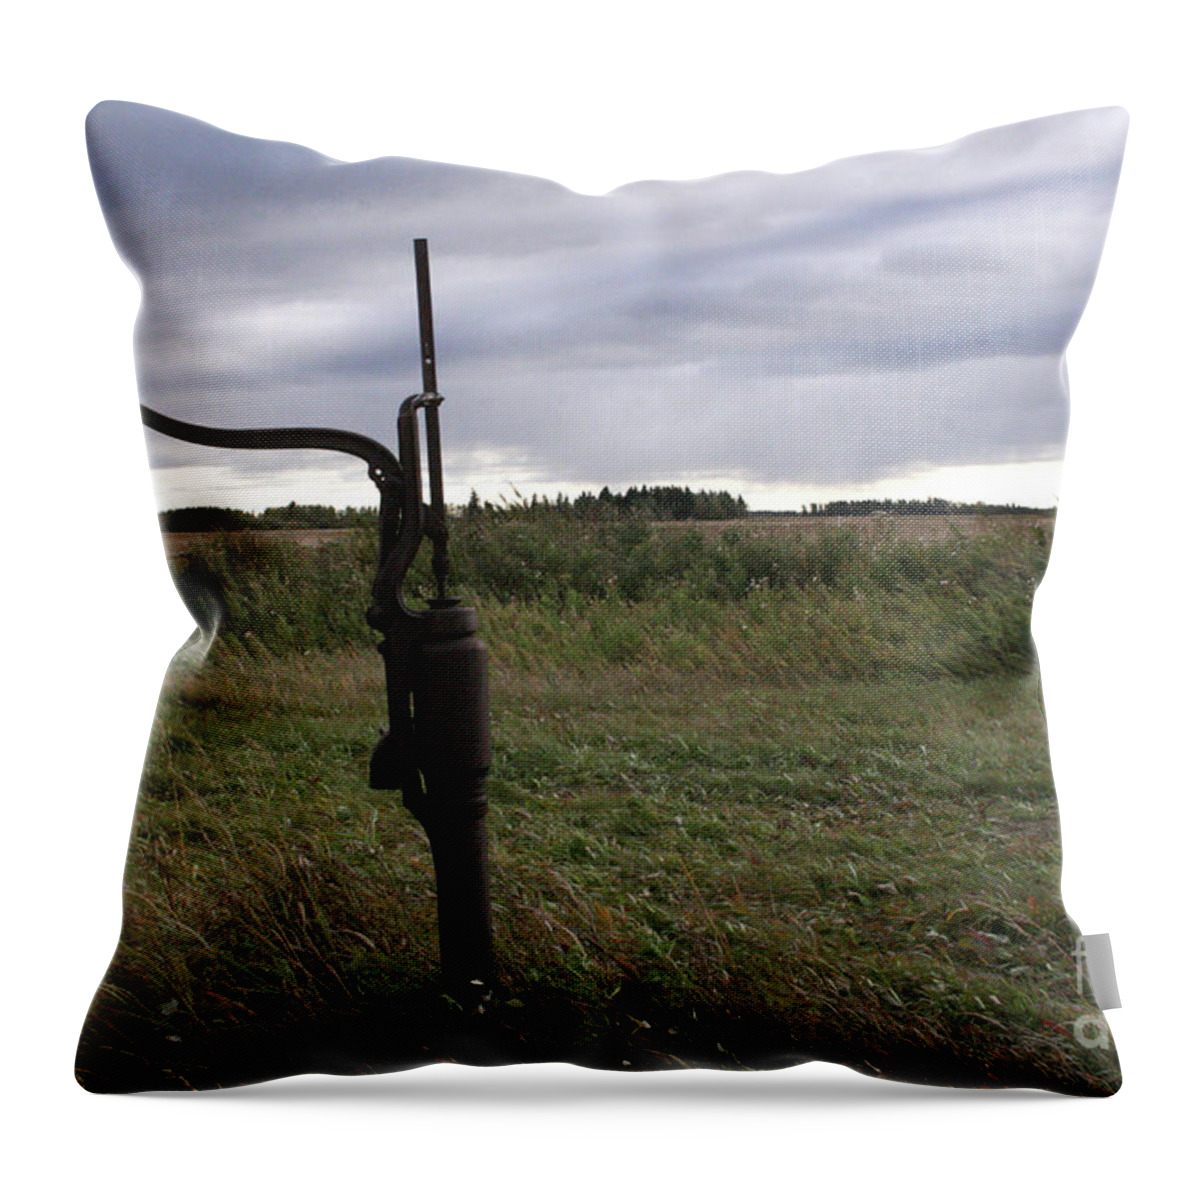 Old Throw Pillow featuring the photograph Old Water Pump by Mary Mikawoz